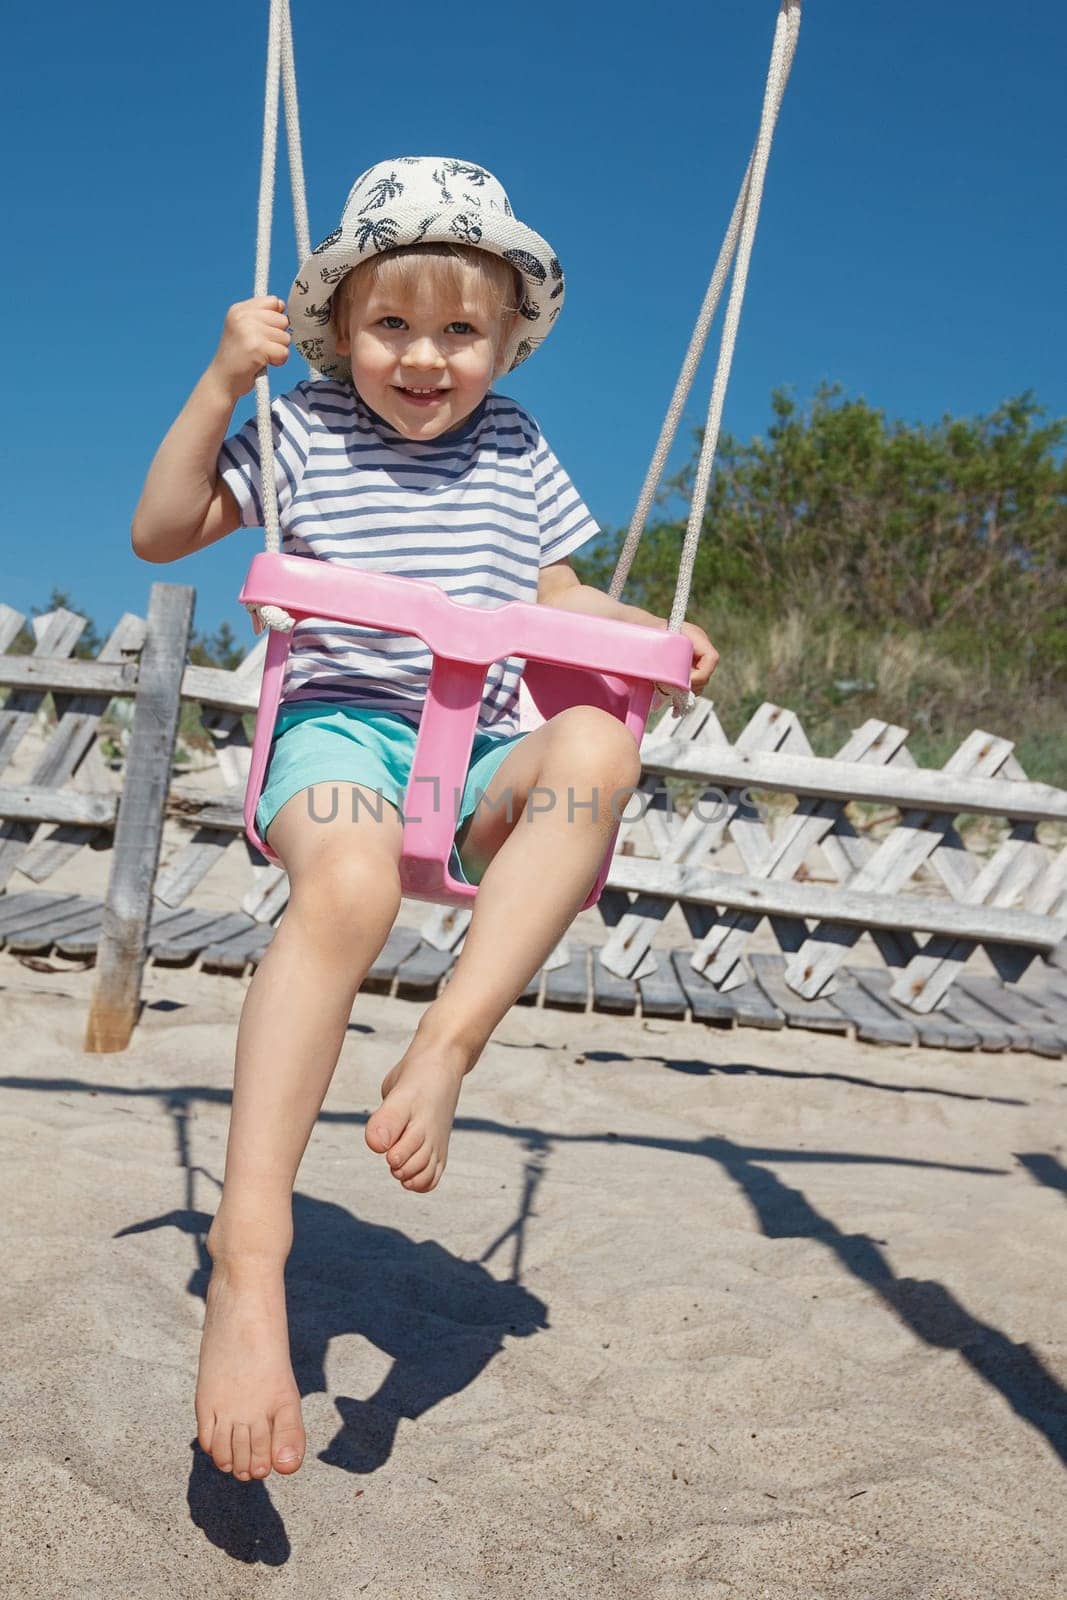 The little hilarious boy swings in a pink swing, he looks straight at the camera and poses. Beach background, sand and blue sky. by Lincikas